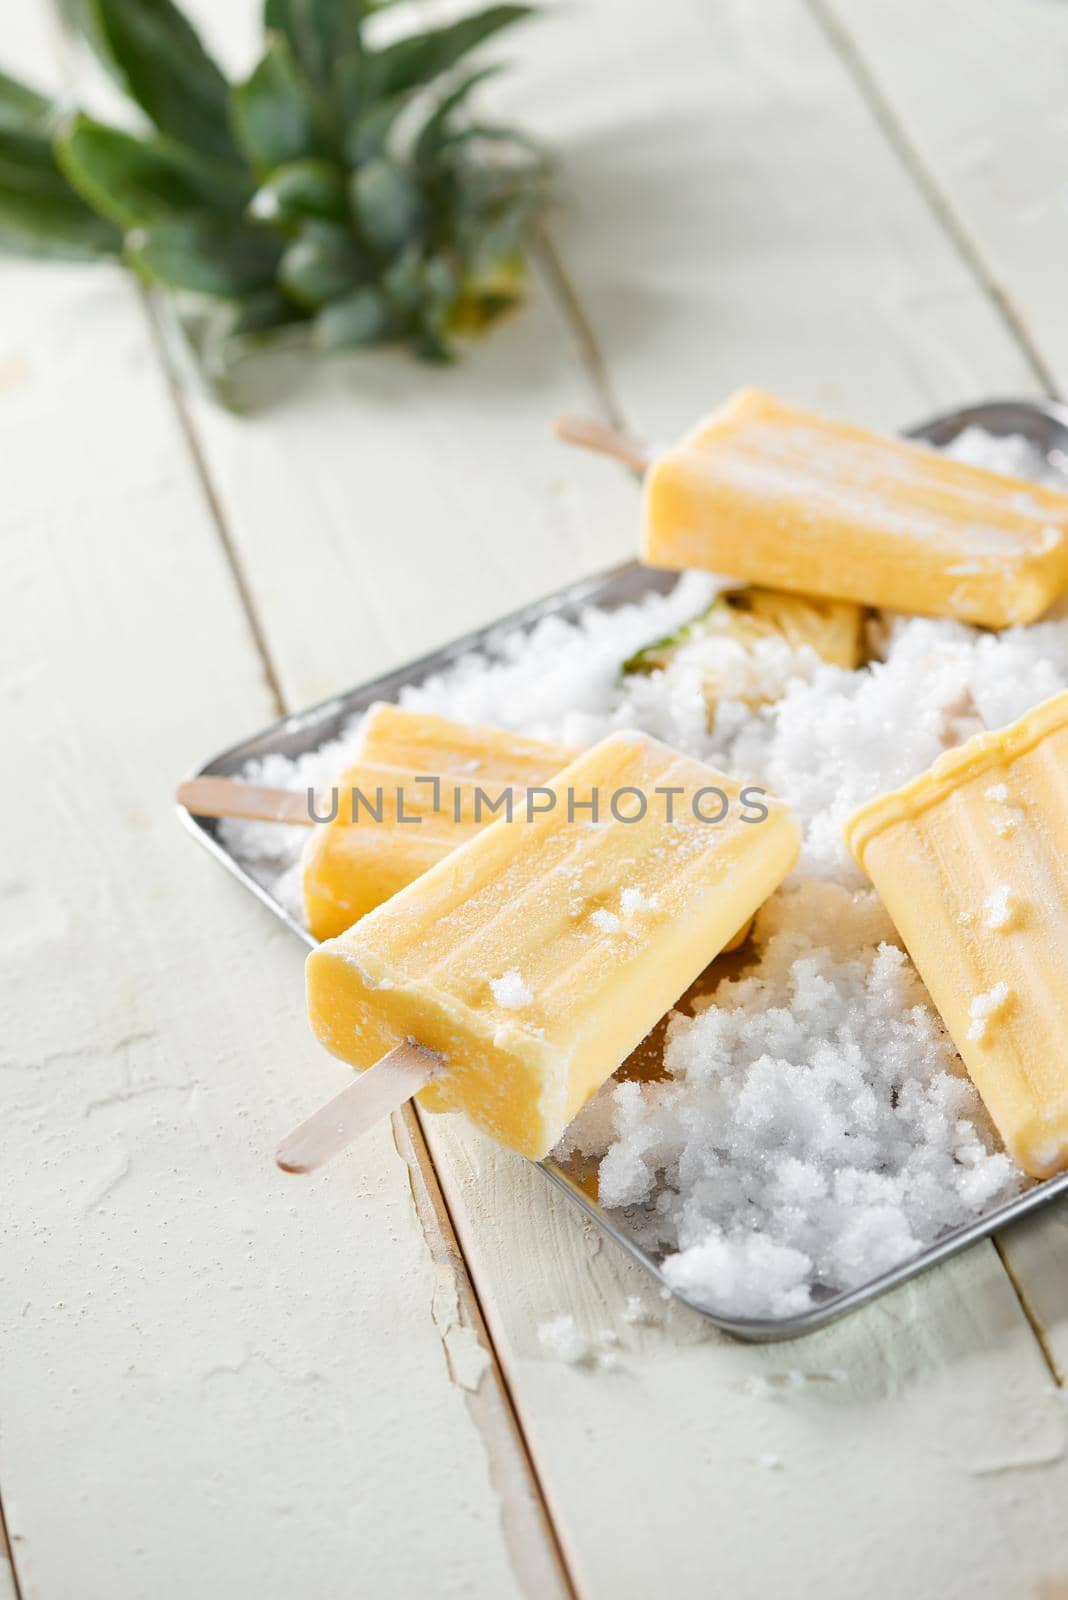 Delicious Homemade Pineapple Popsicles on Ice Cubes  by makidotvn